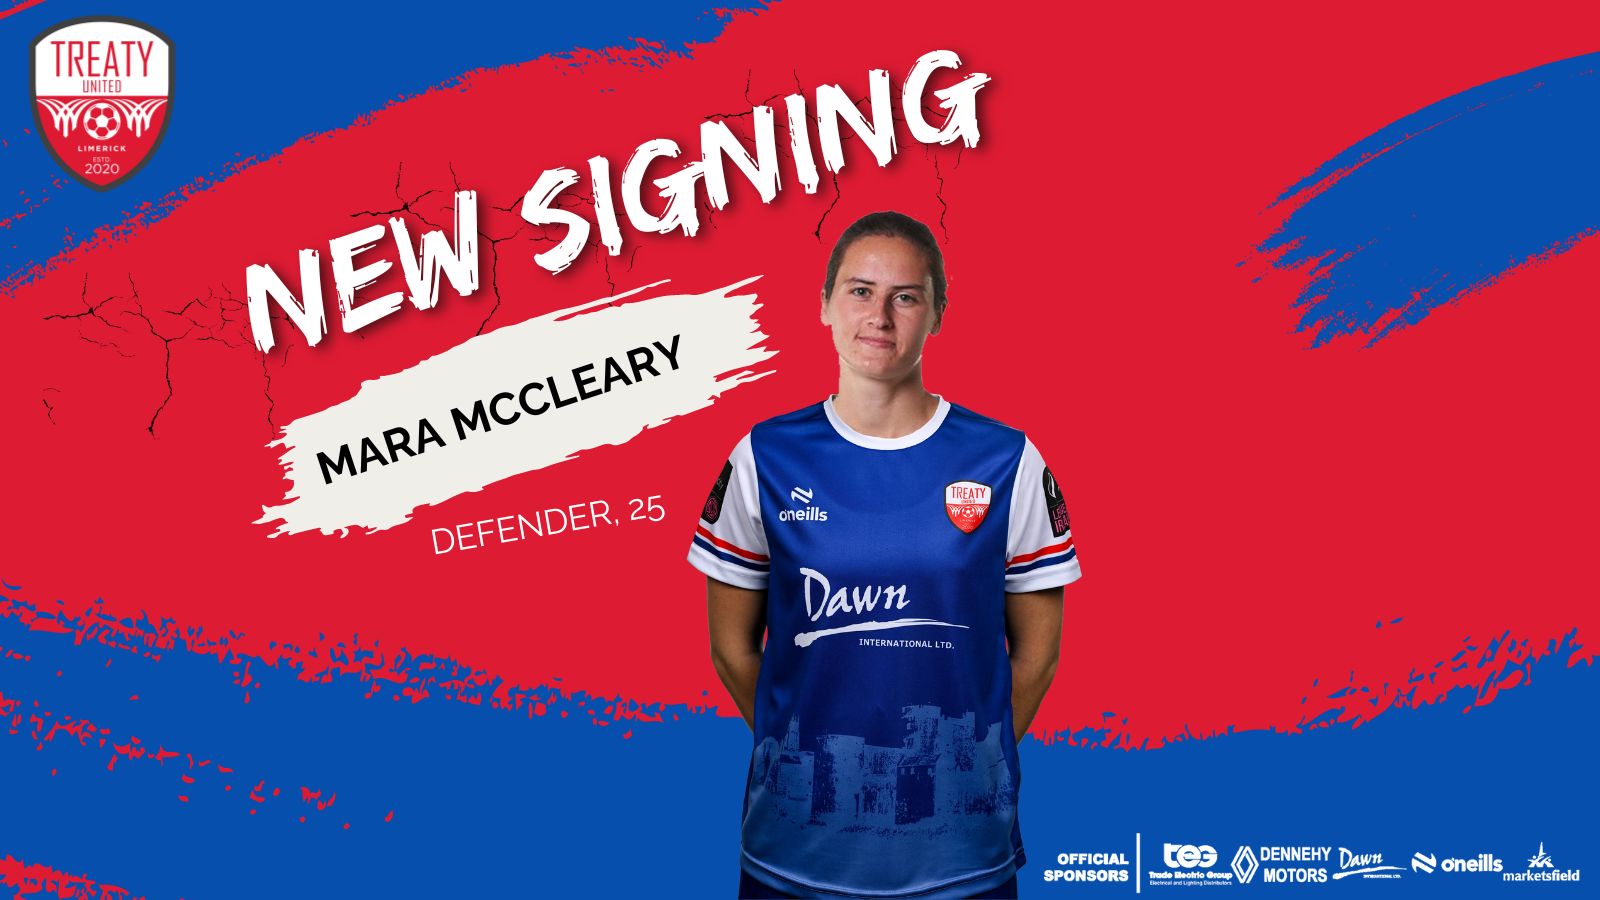 Featured image for “Treaty Sign Mara McCleary”